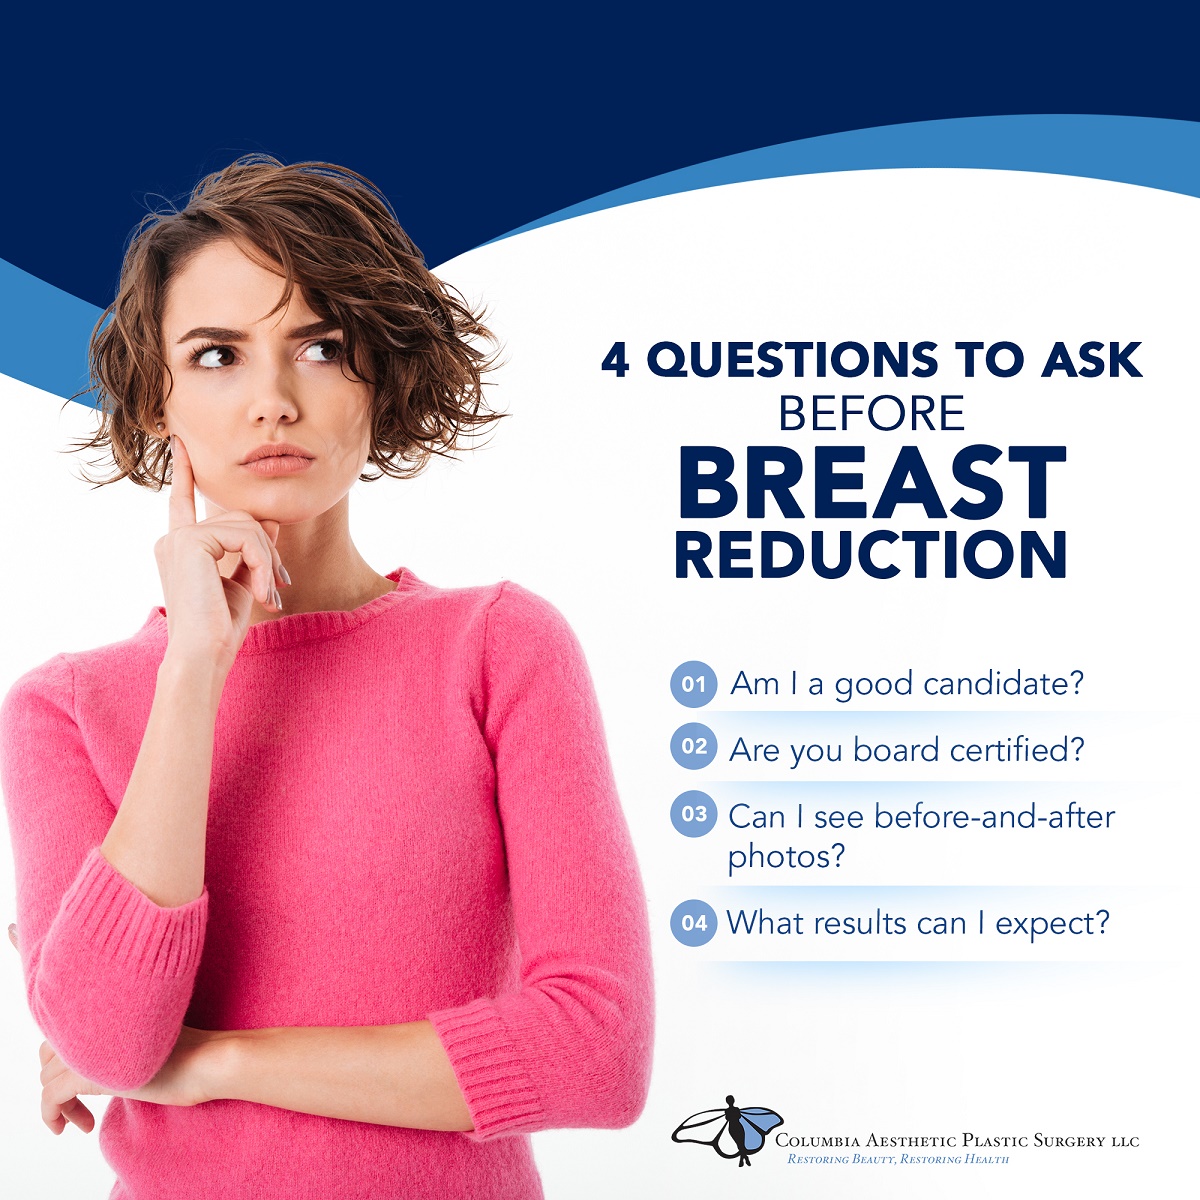 4 Questions To Ask Before Breast Reduction [Infographic] img 1